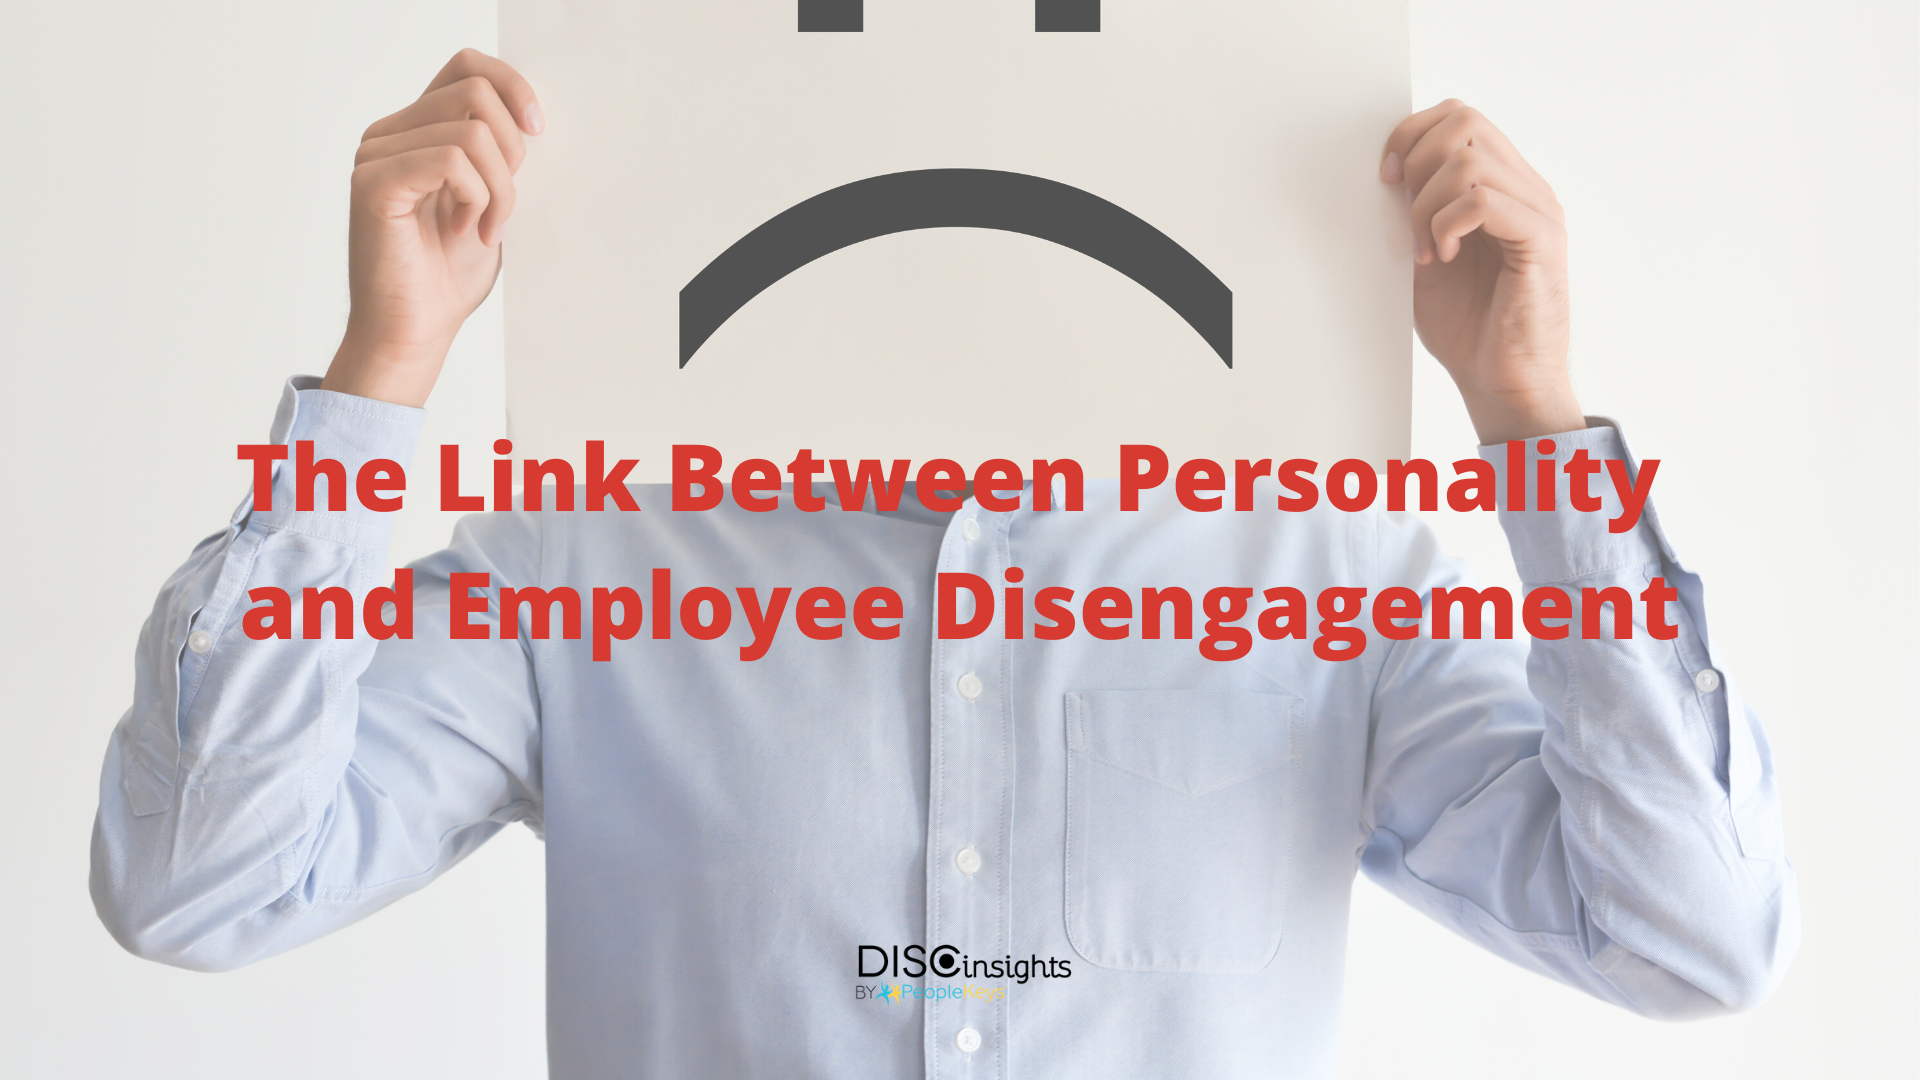 The Link Between Personality and Employee Disengagement